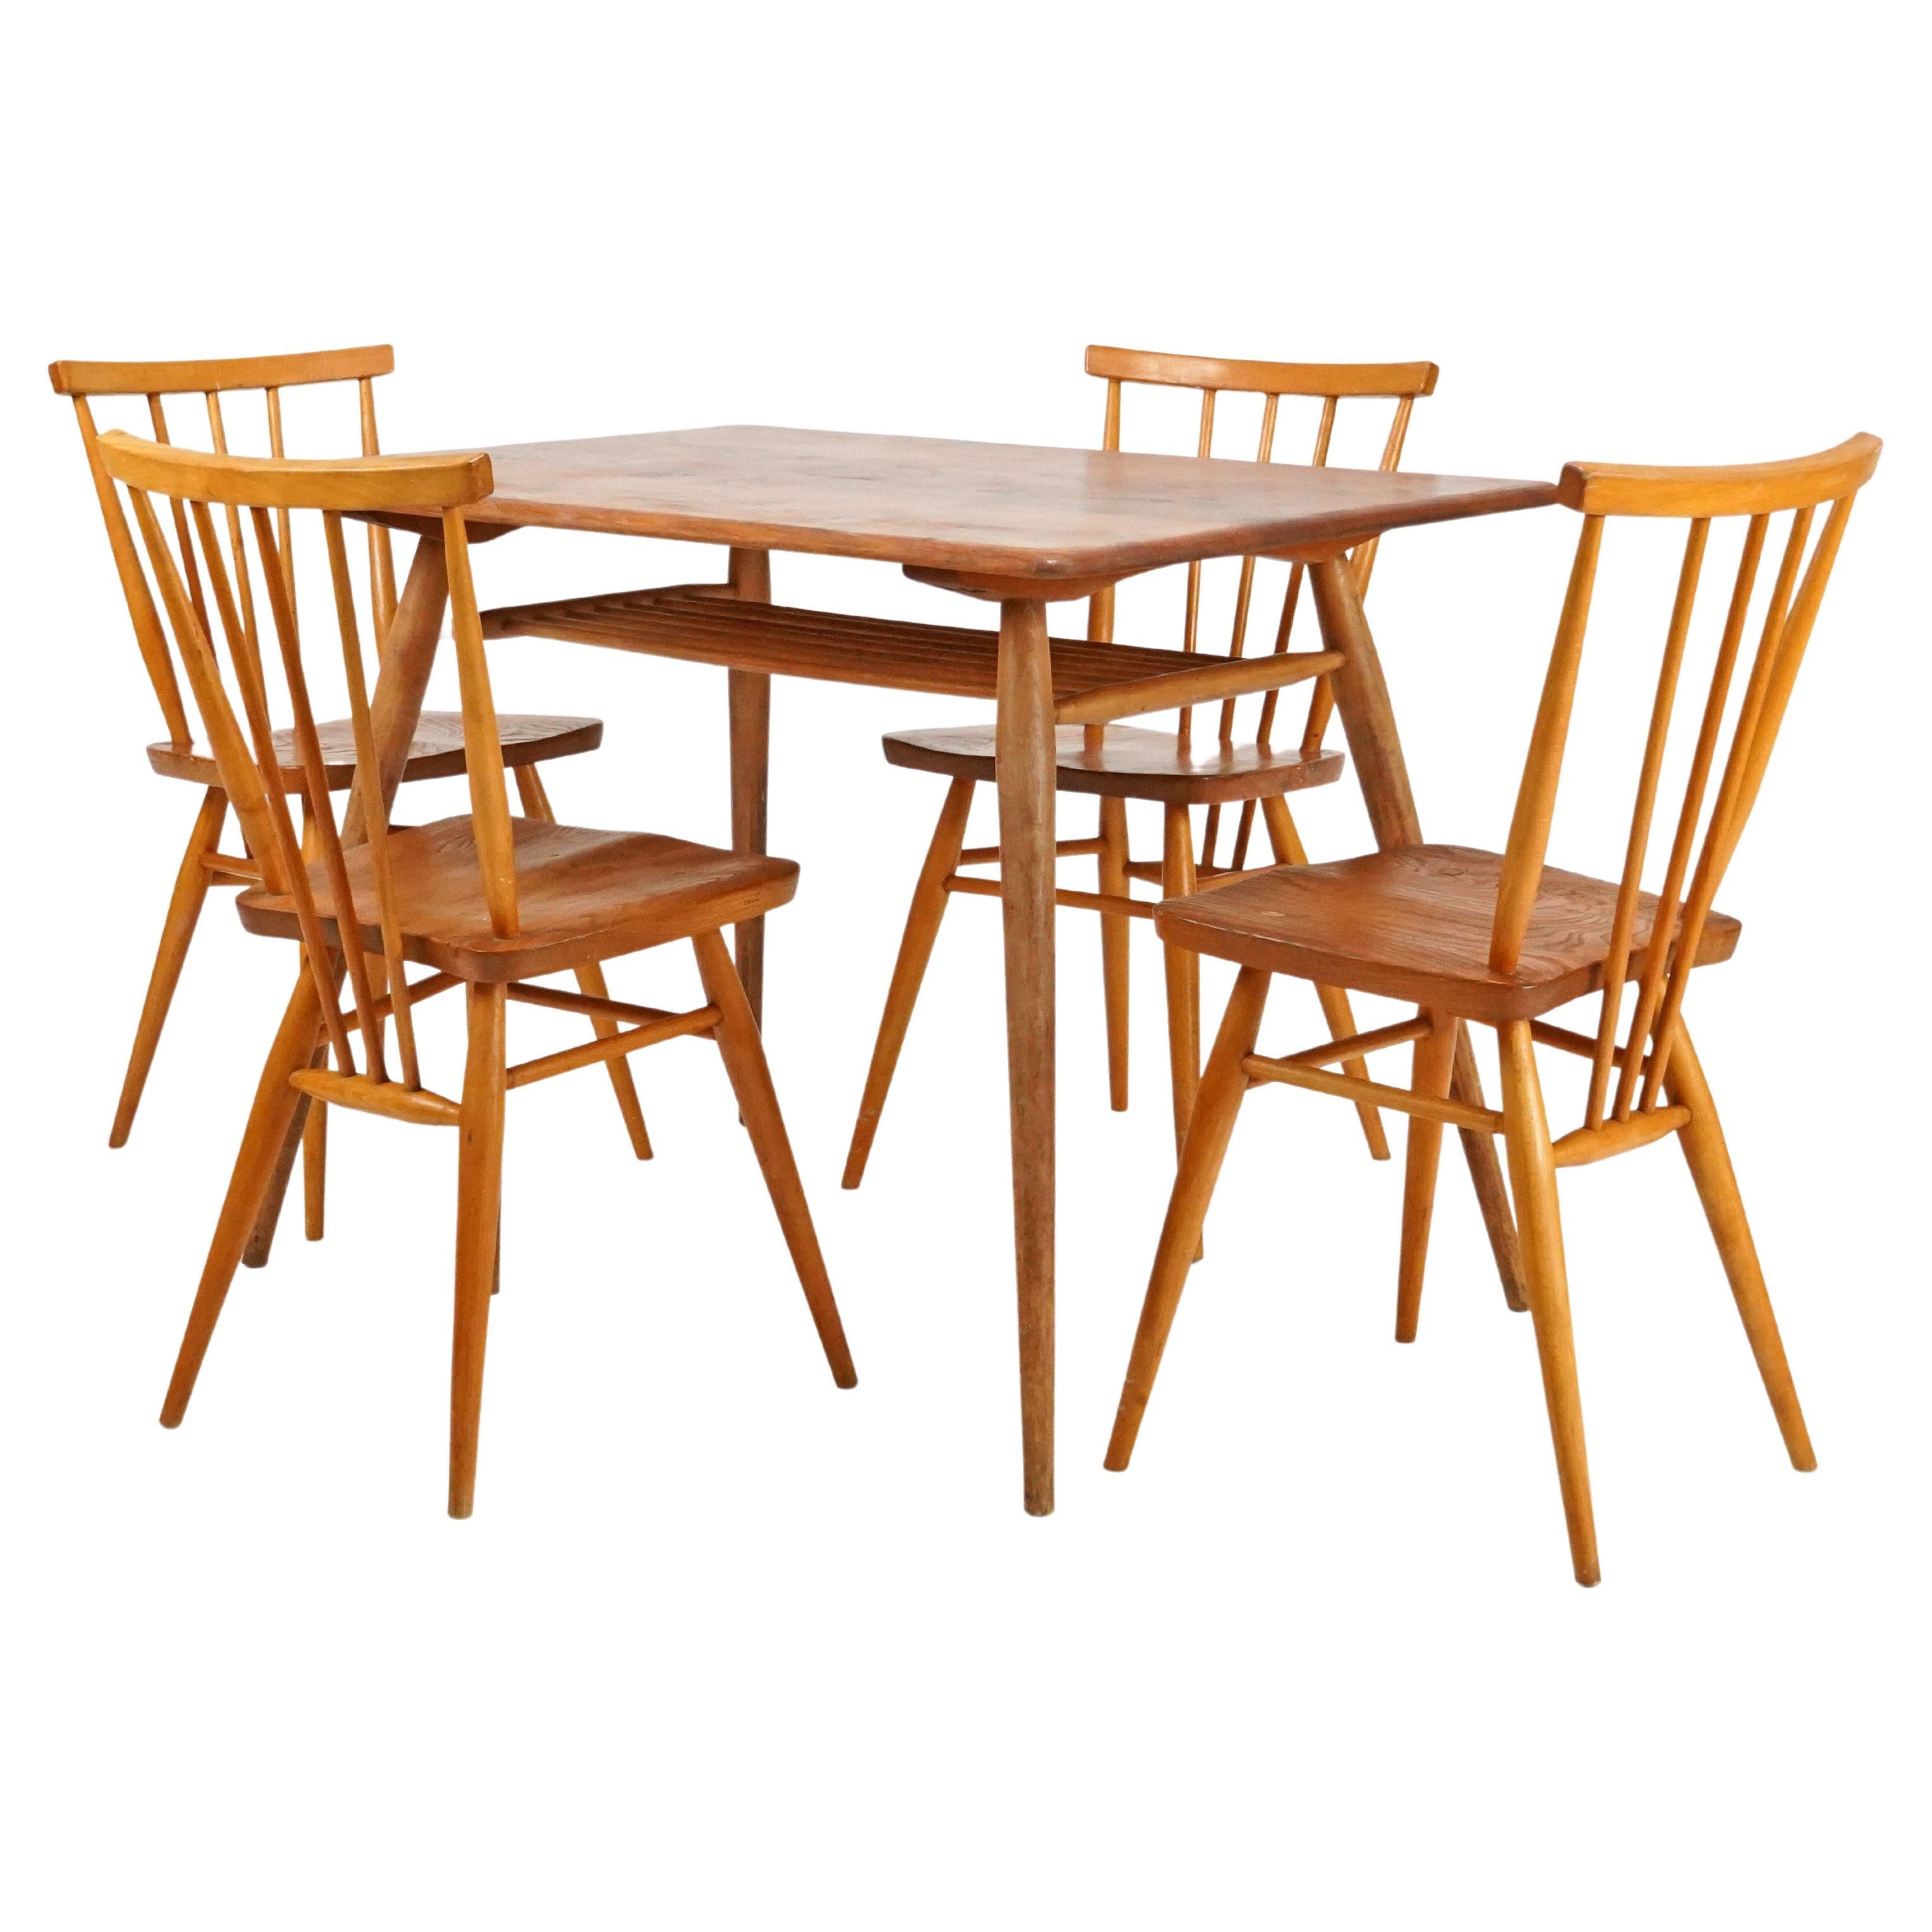 1960s, Ercol Blonde Breakfast Table & Four All Purpose Chair Set